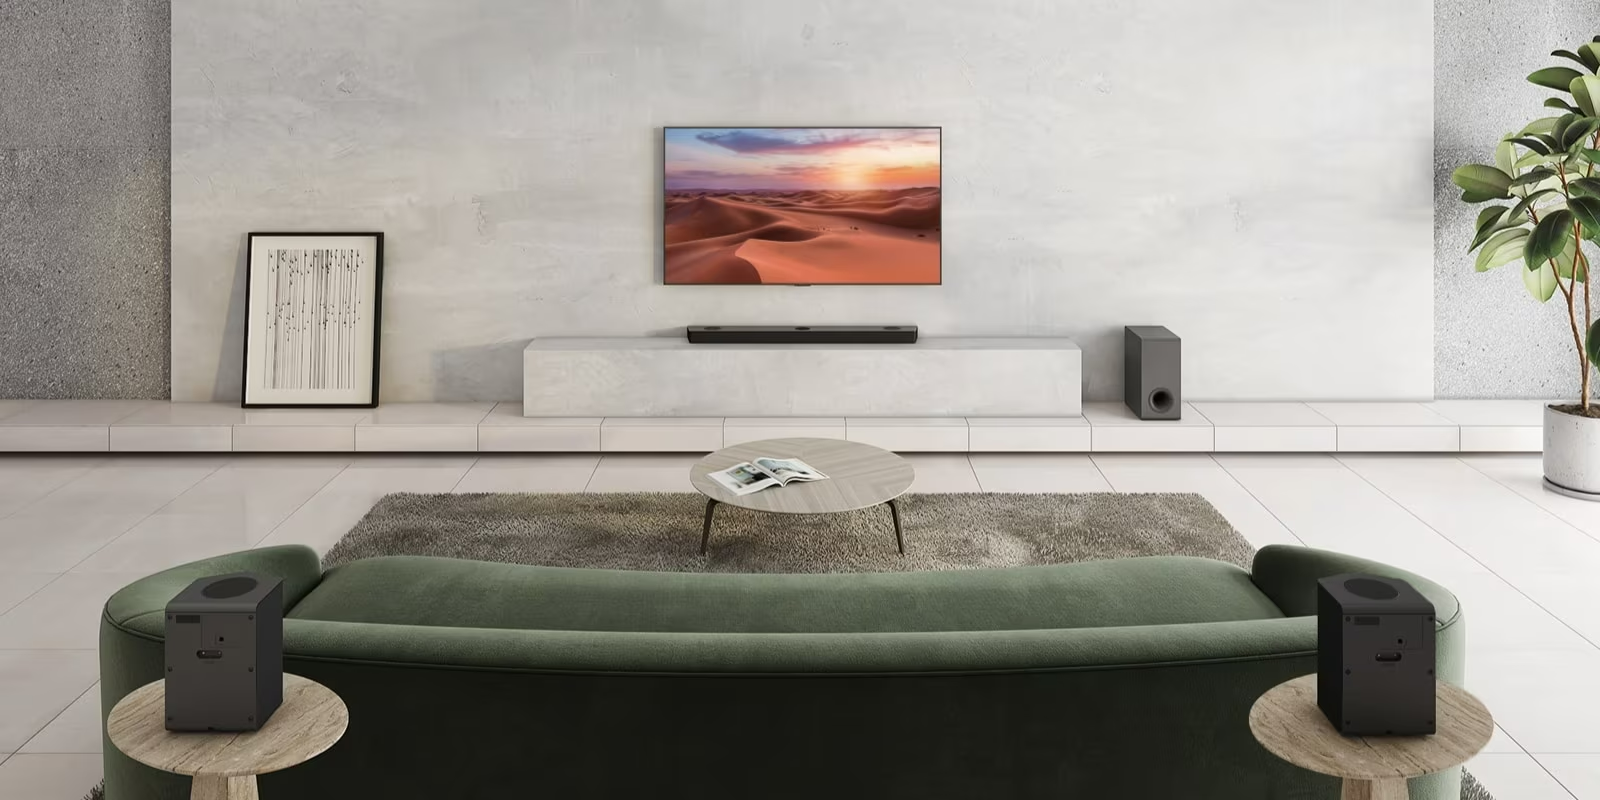 There is TV showing a nature image. A sound bar, a subwoofer, and 2 rear speakers in a wide living room. A wave with grid is coming out from sound bar, measuring the entire space of living room. 